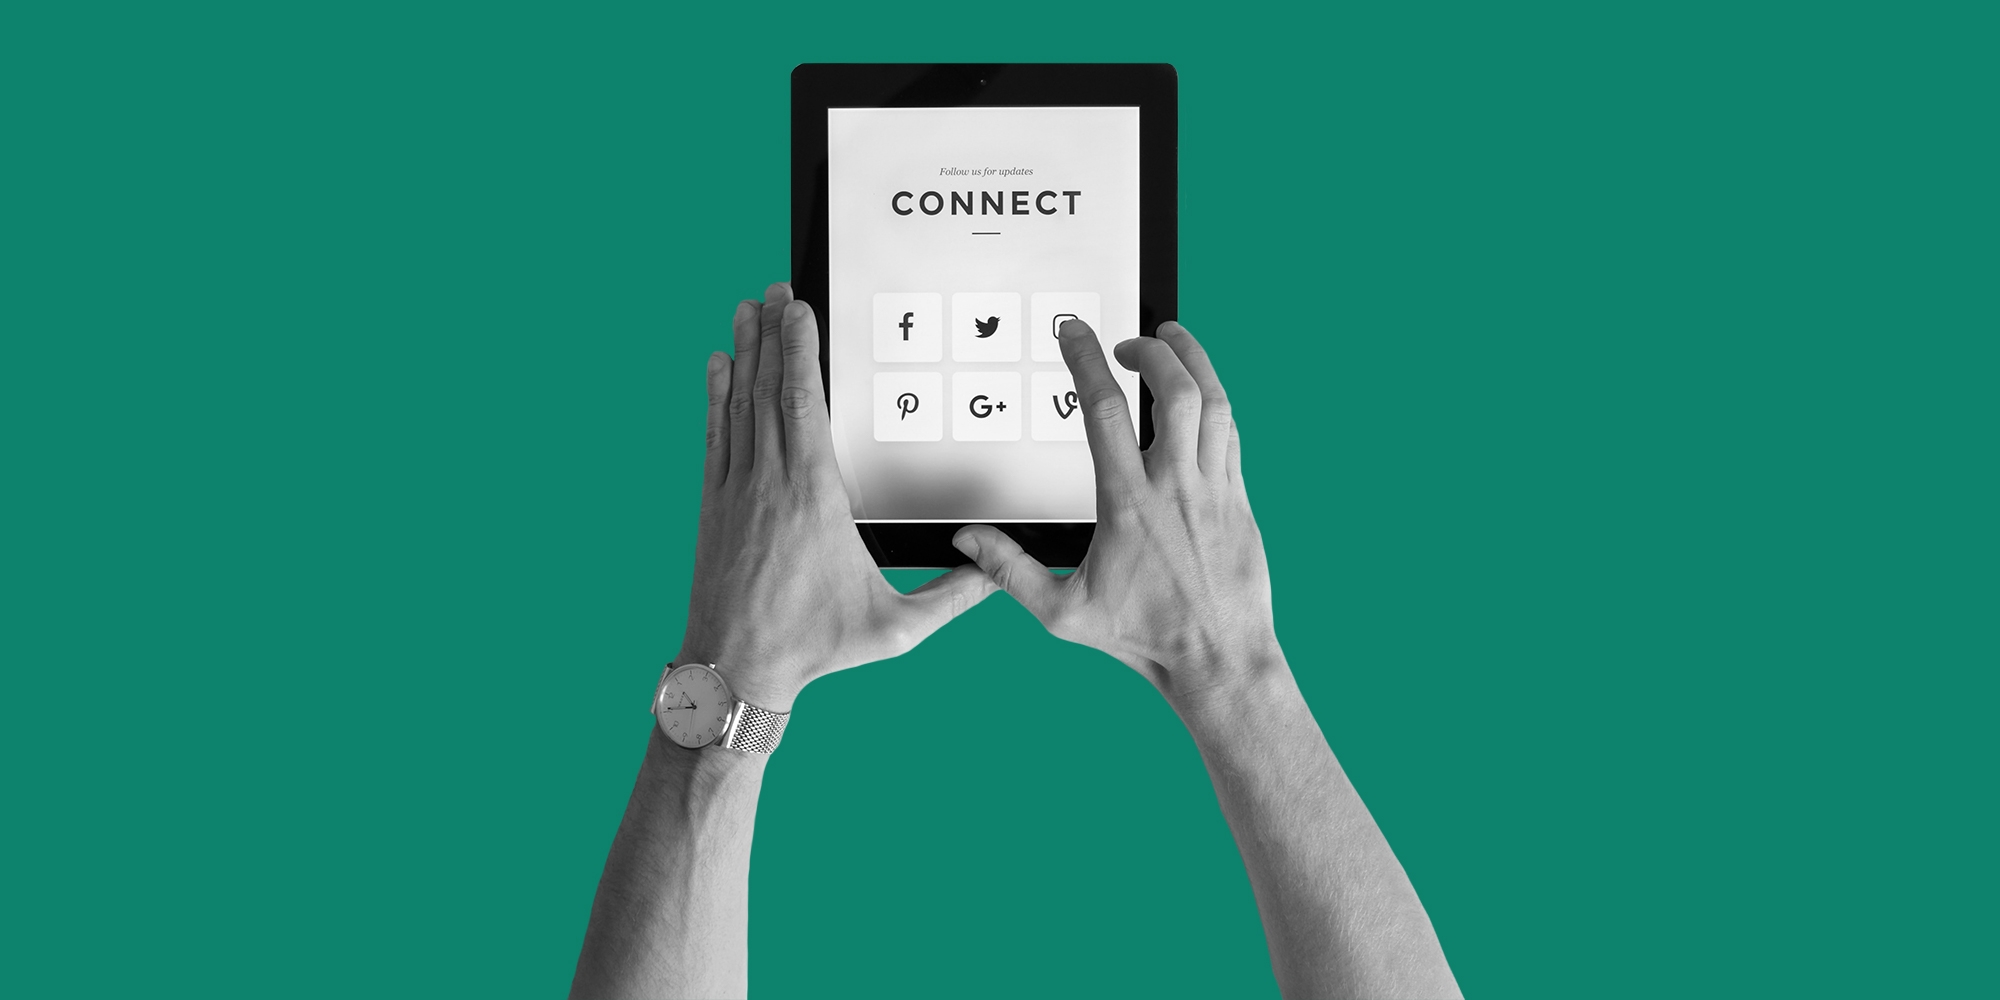 Grayscale photo of hands using a tablet to access social media, set against a dark green backdrop